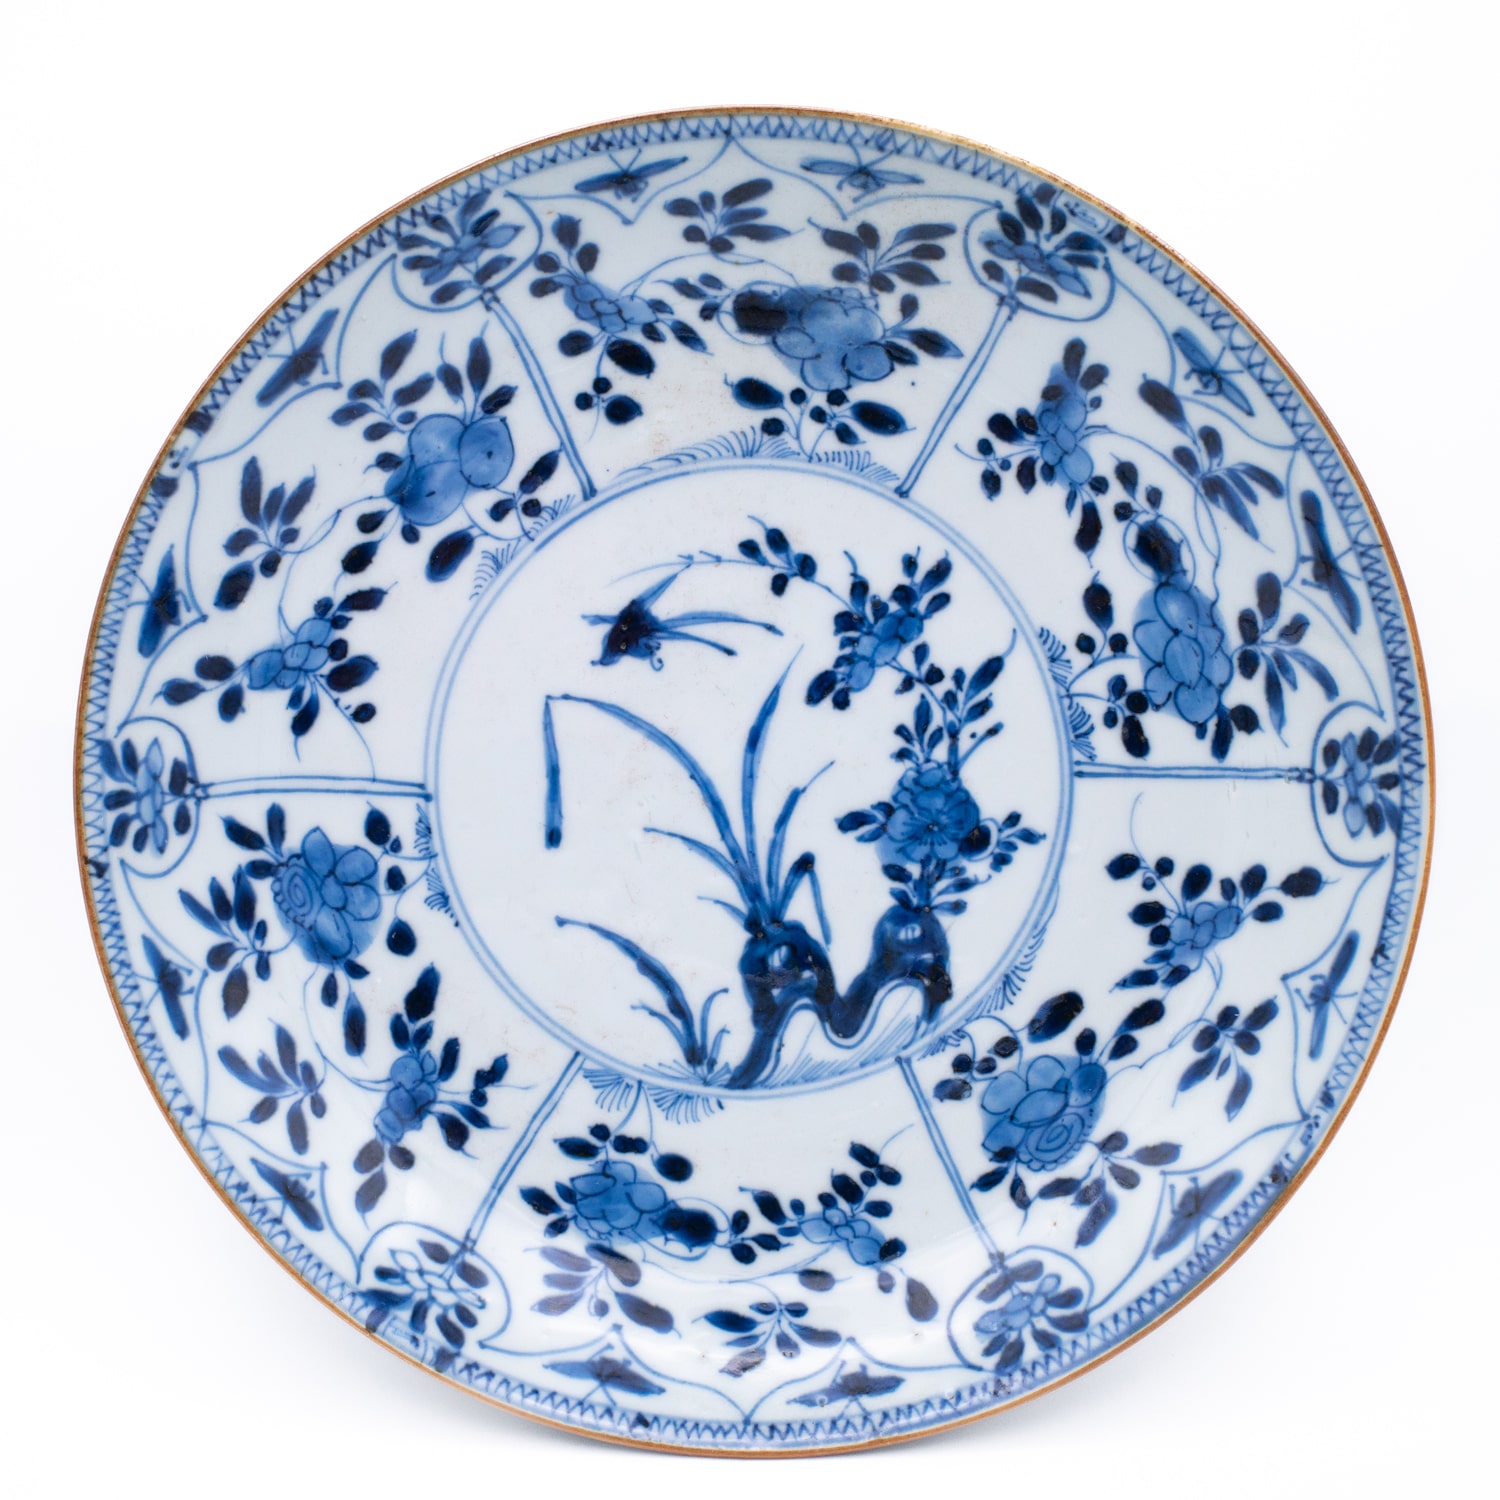 Antique Chinese Blue and White Export Porcelain Dish With Floral ...